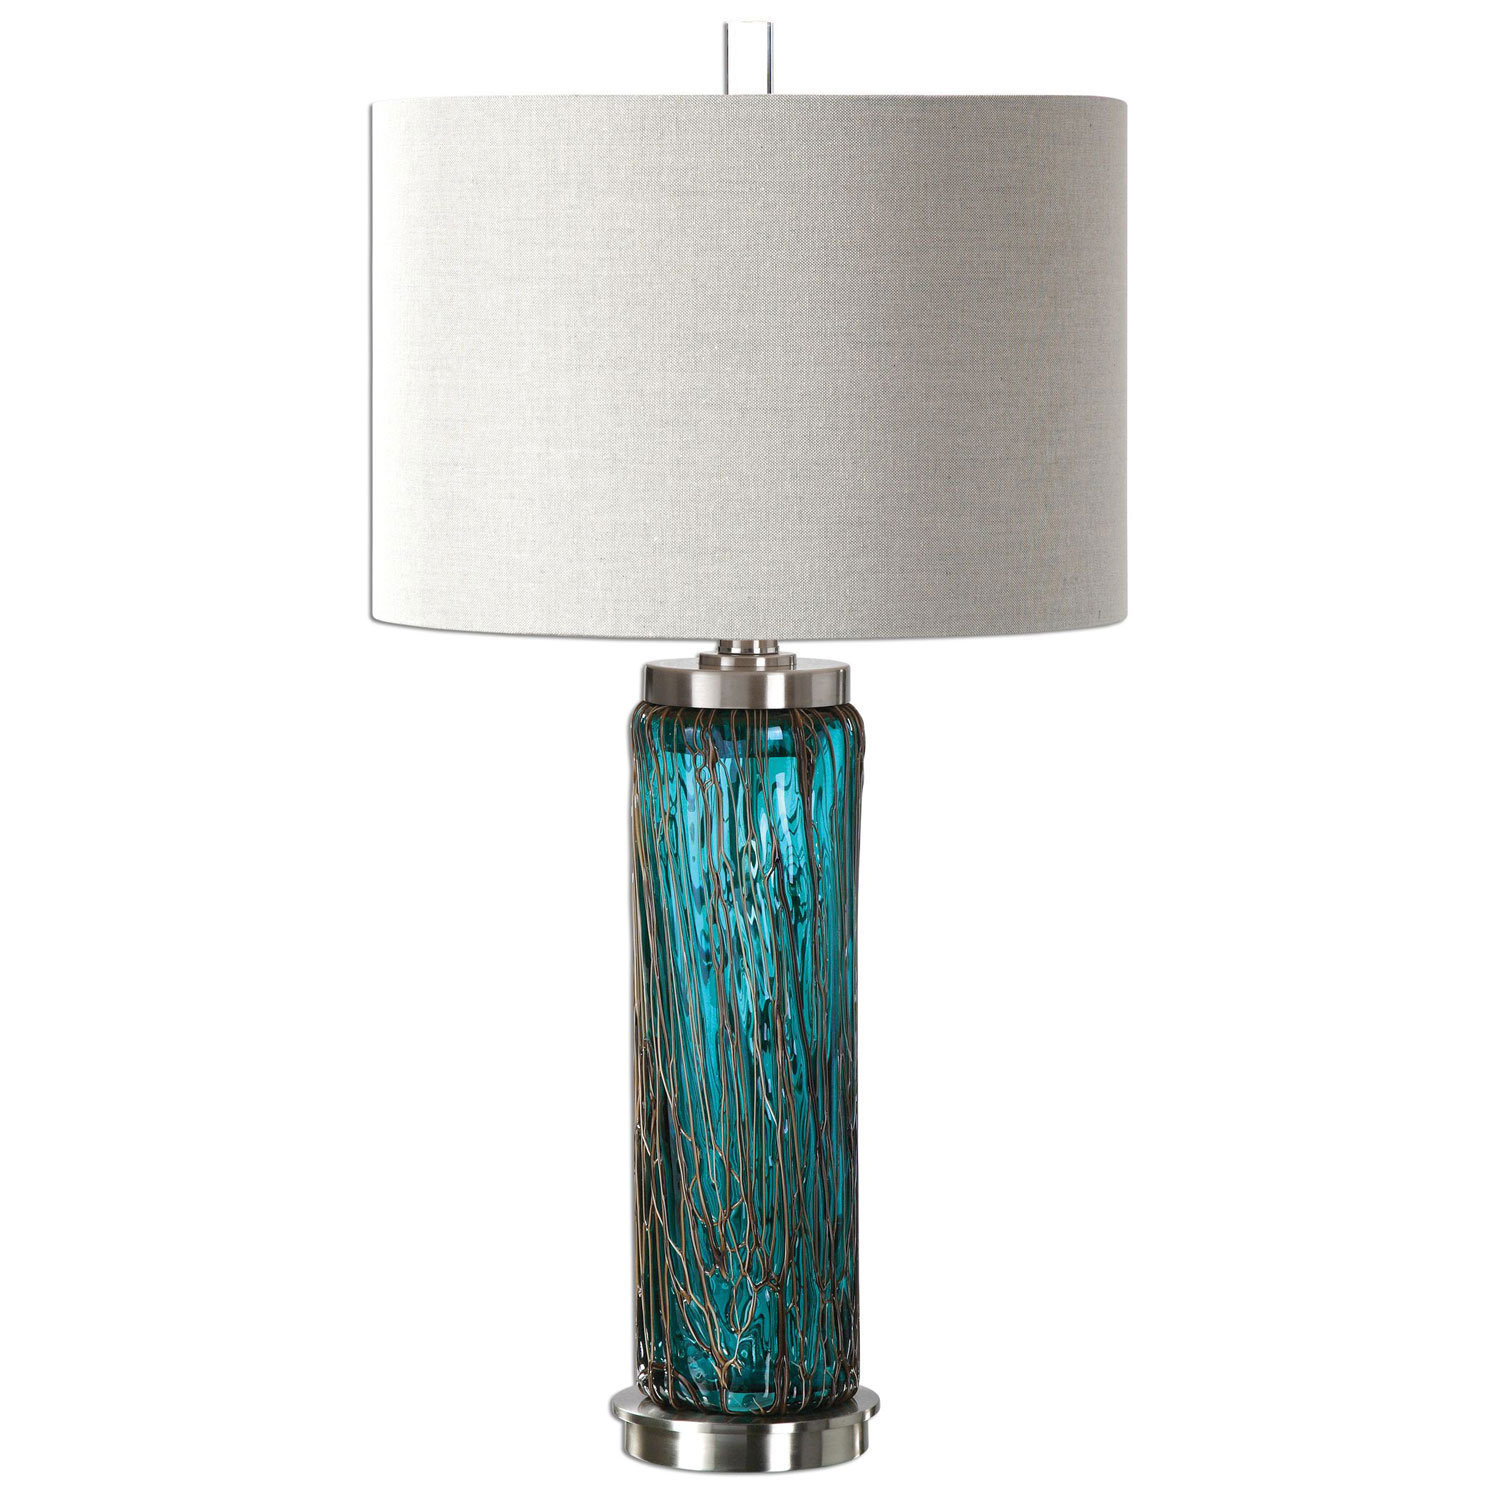 uttermost almanzora blue one light glass table lamp accent hover zoom wine cart west elm carpets modern clock winsome wood beechwood end espresso cassie with top cappuccino finish